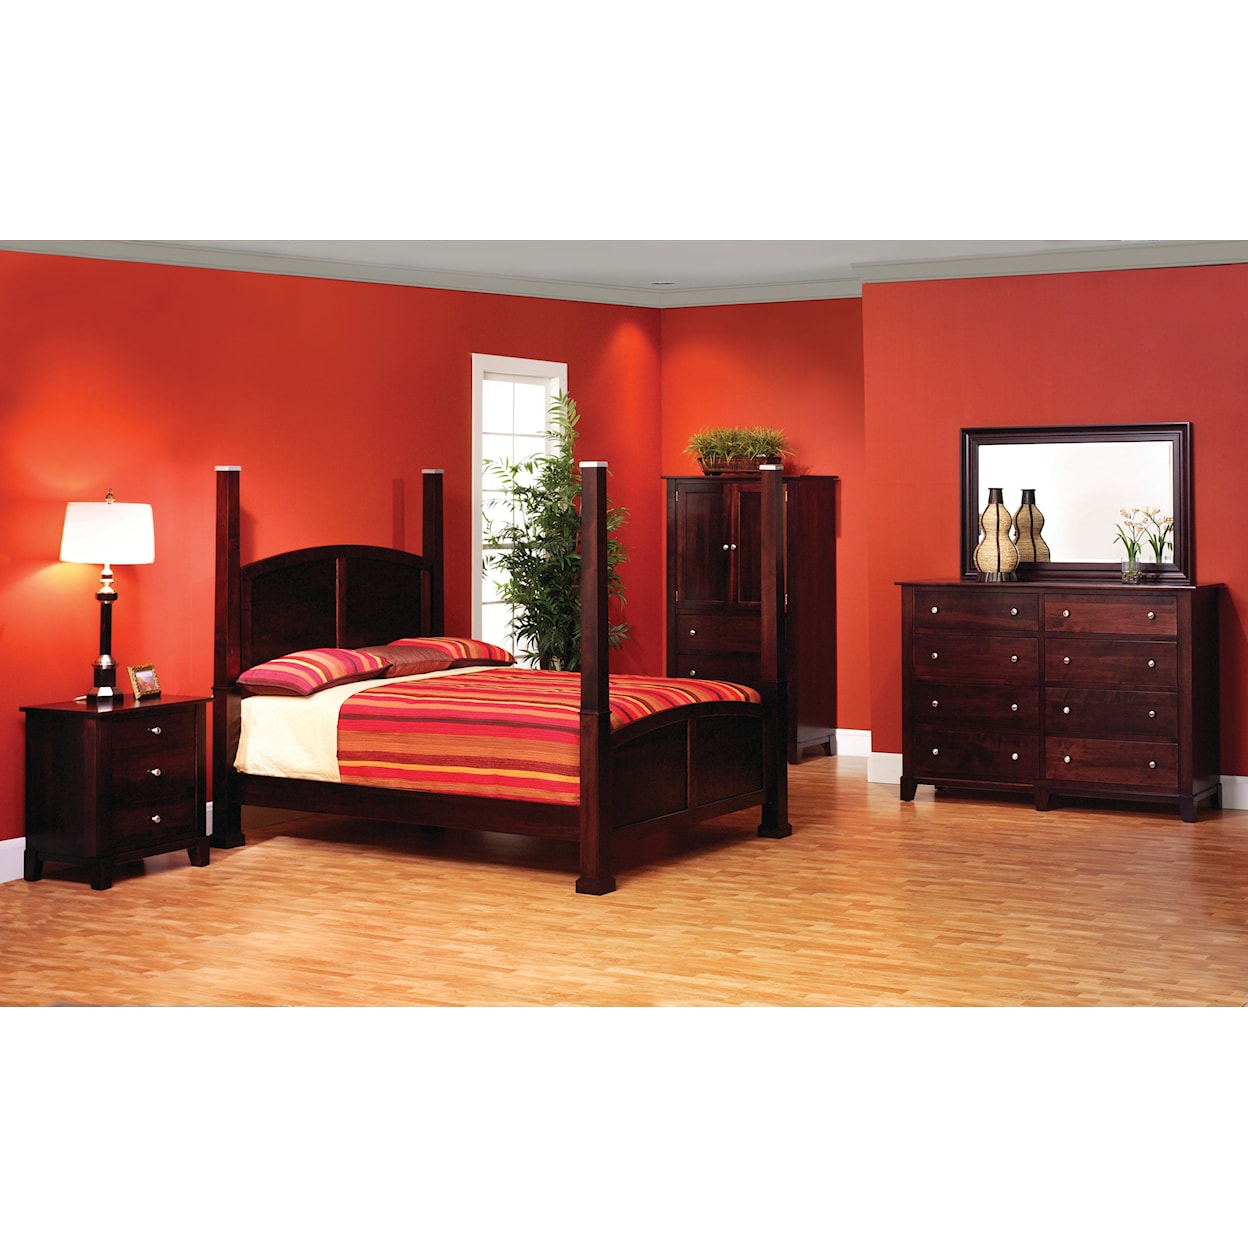 Millcraft Greenwich California King Poster Bed